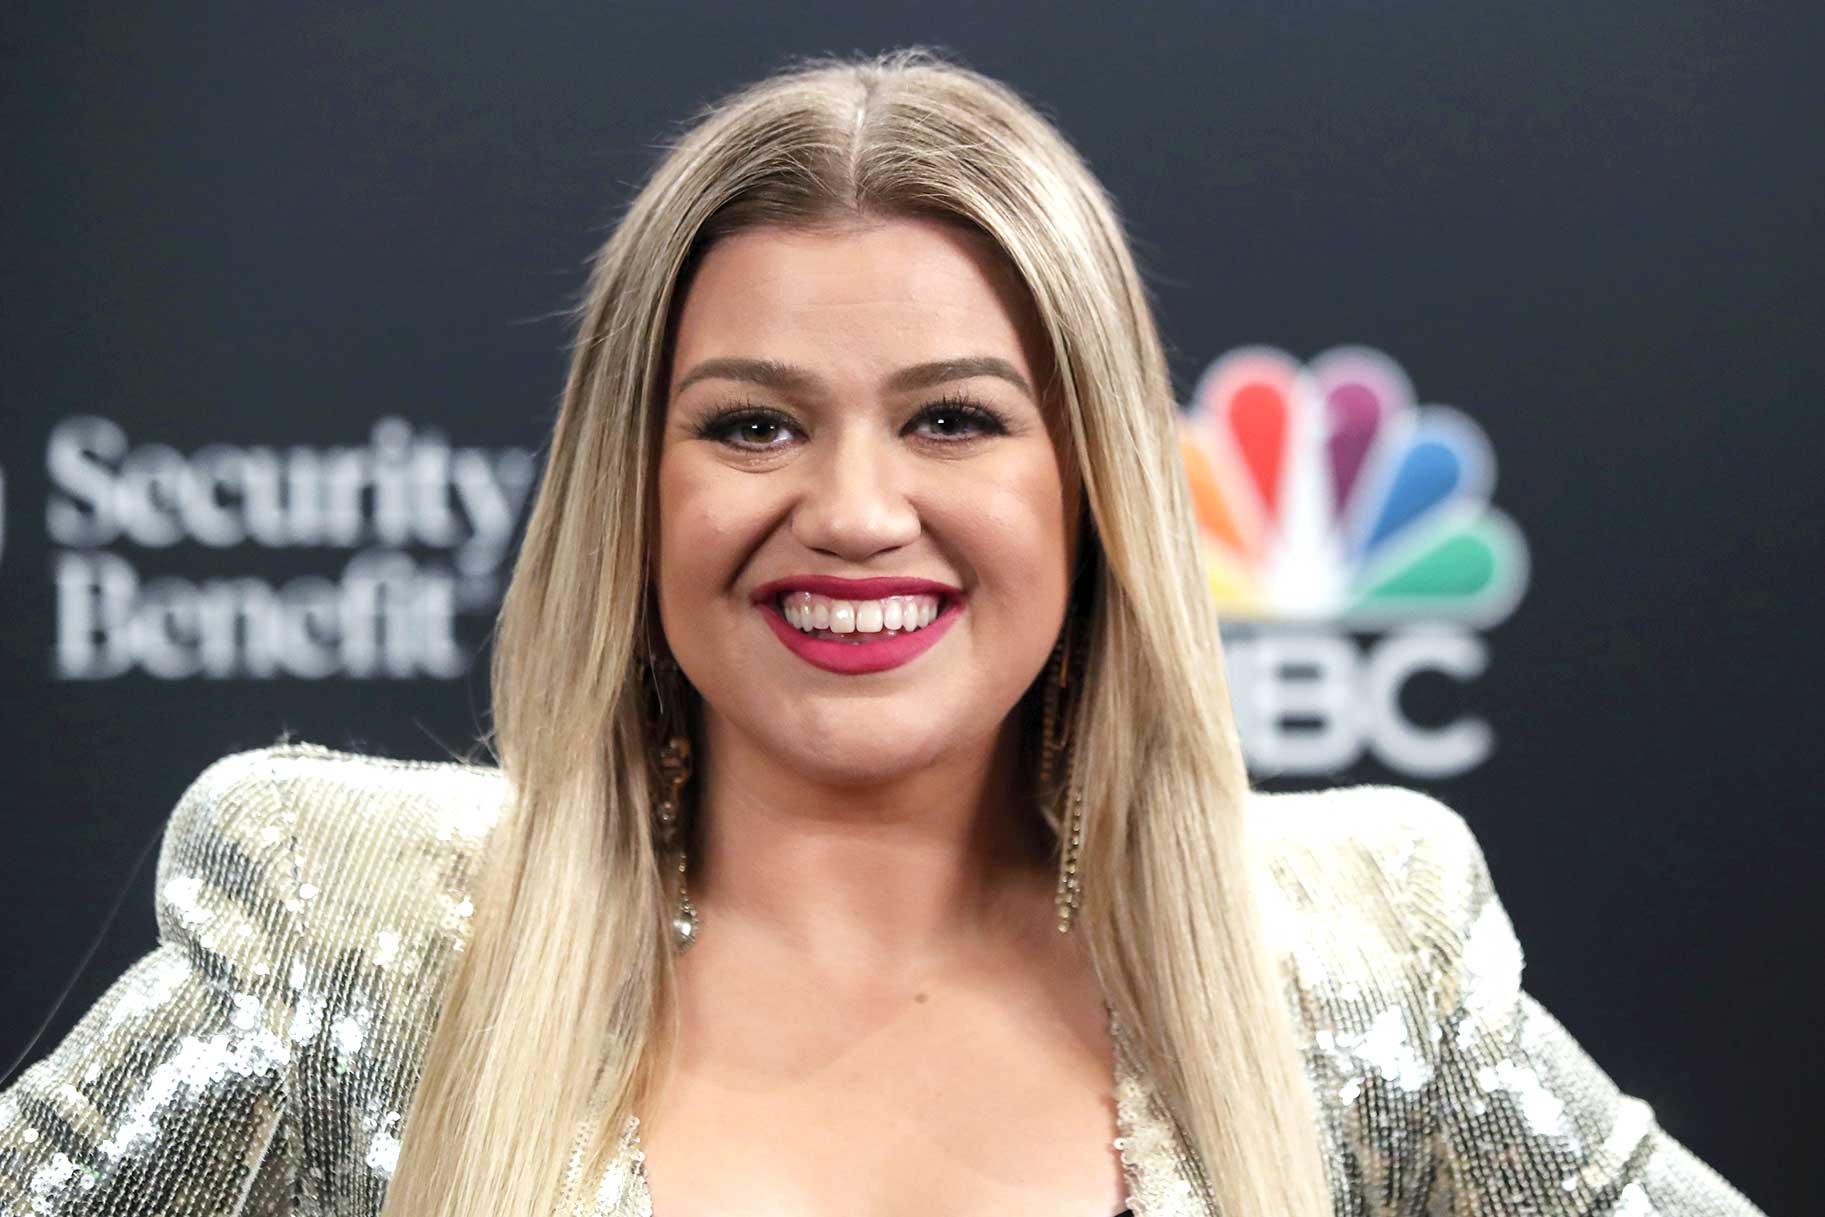 Kelly Clarkson Says This Voice Coach Has the Biggest Ego